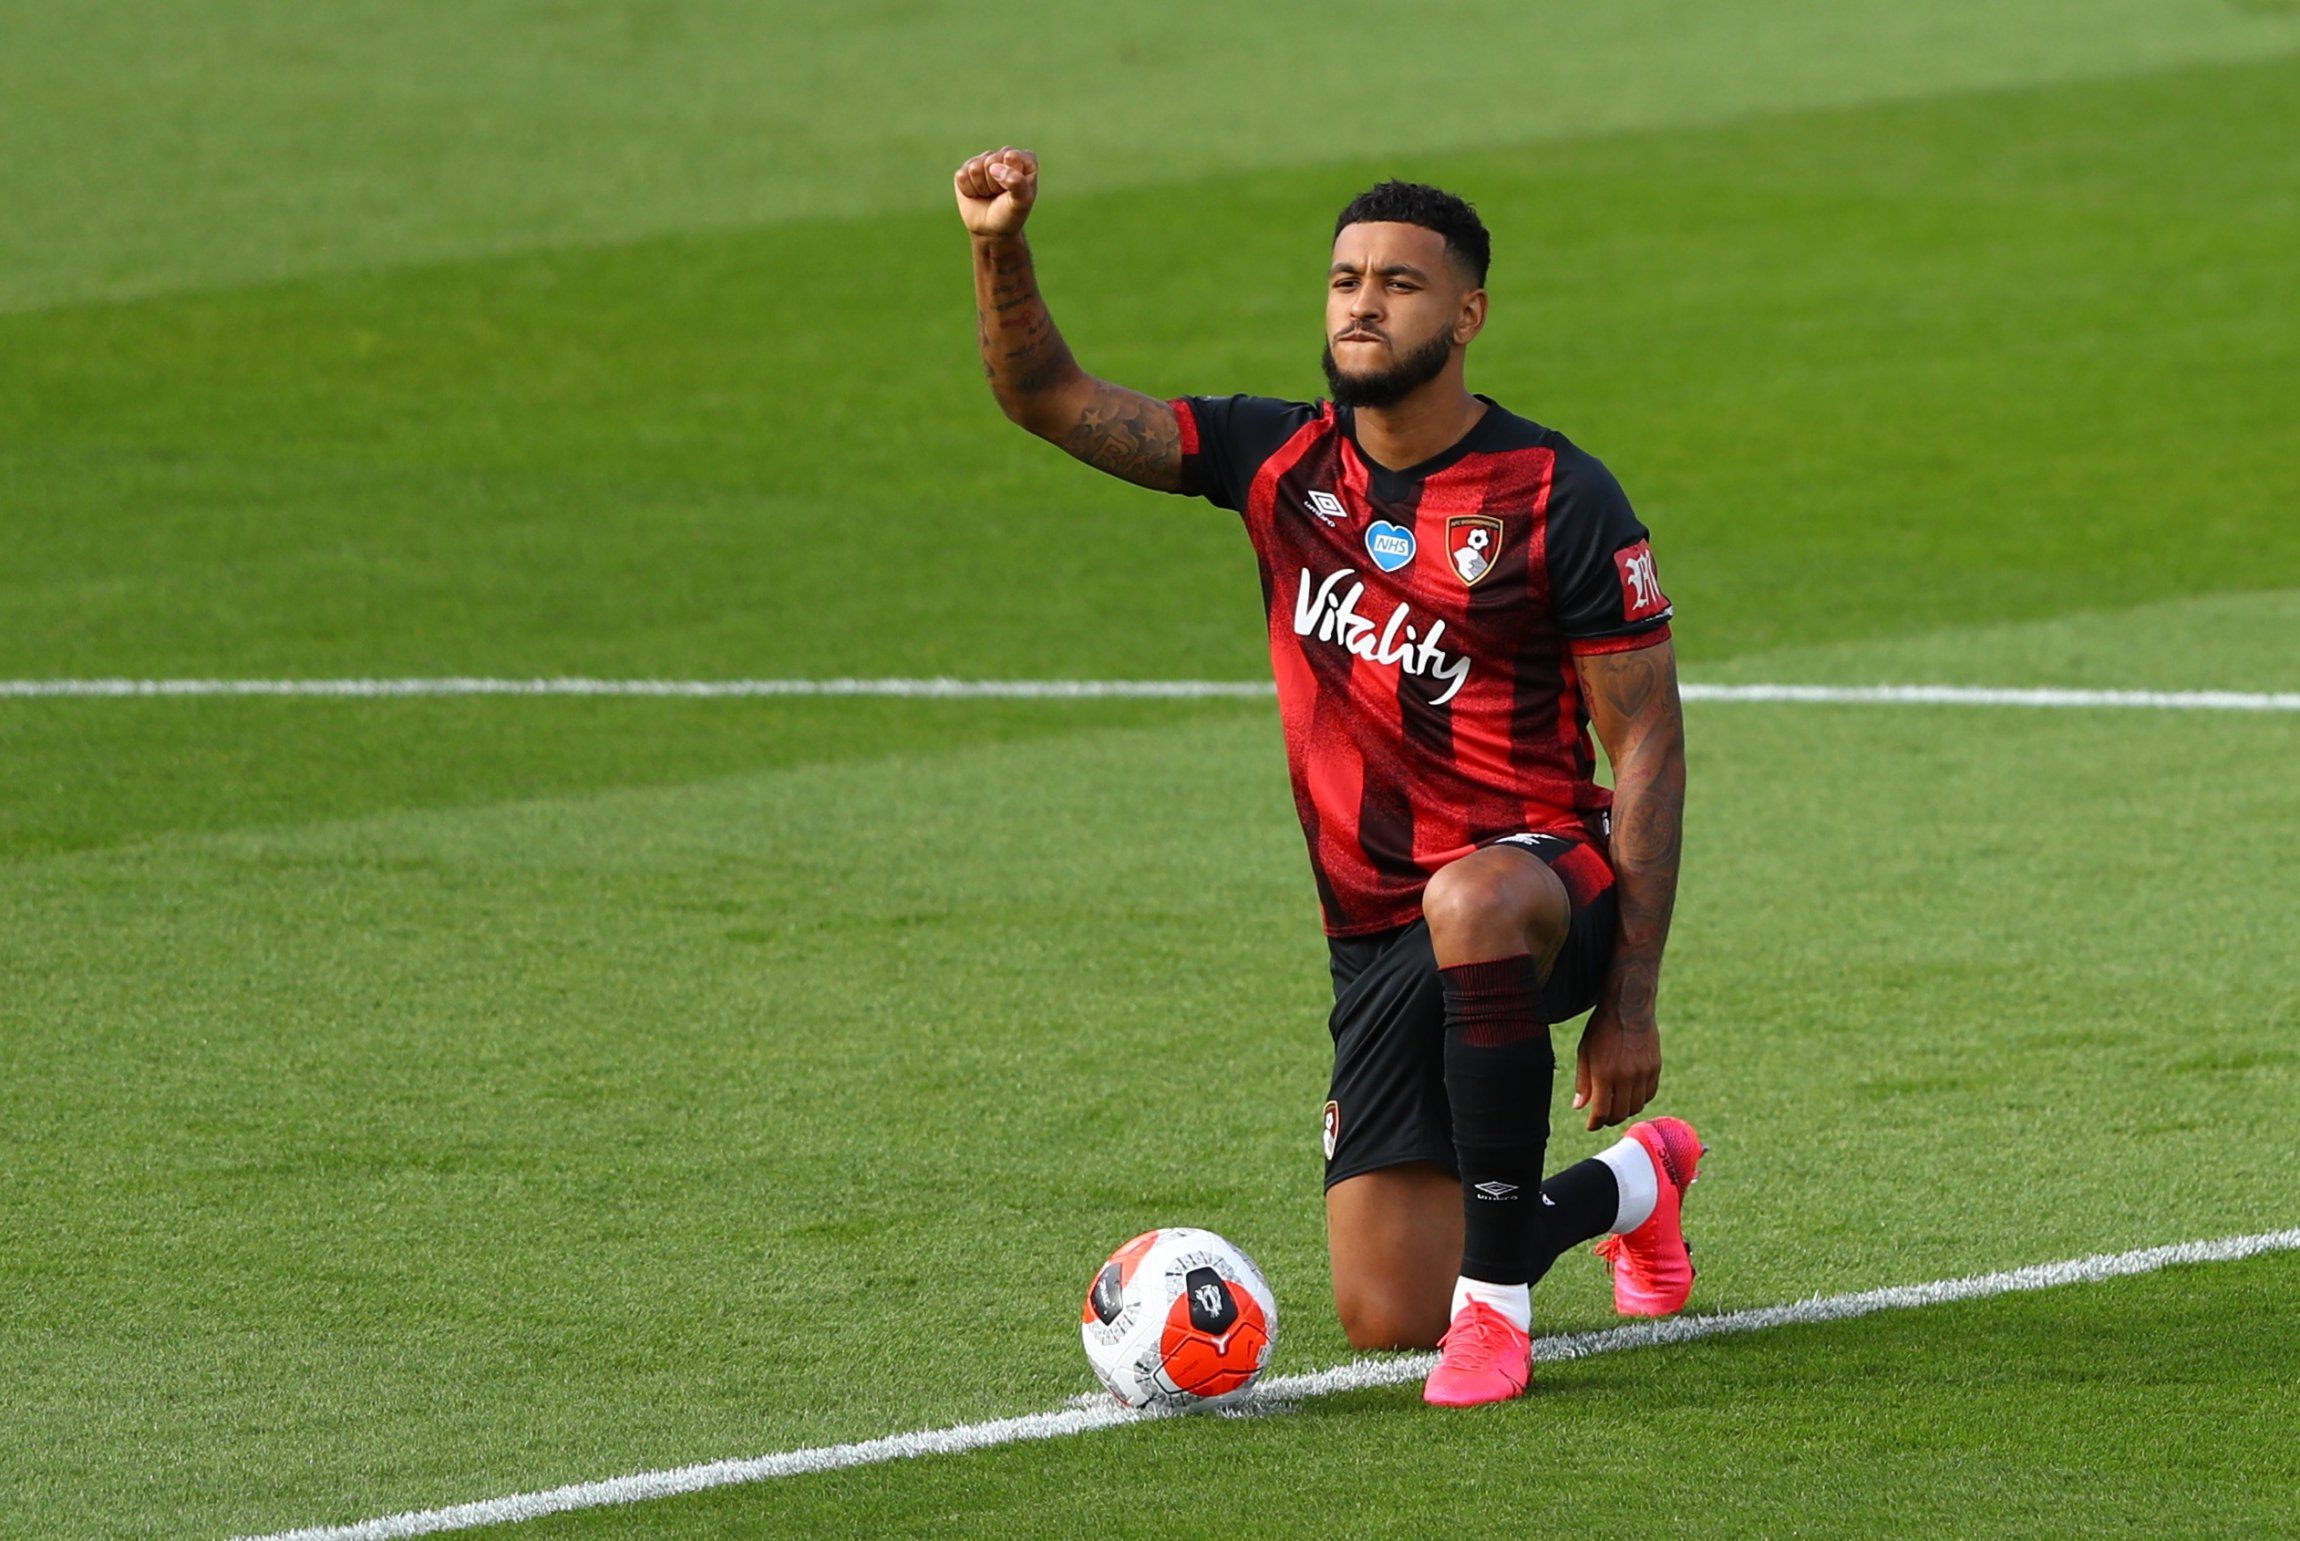 bournemouth's-joshua-king-takiking-a-knee-for-the-blm-movement